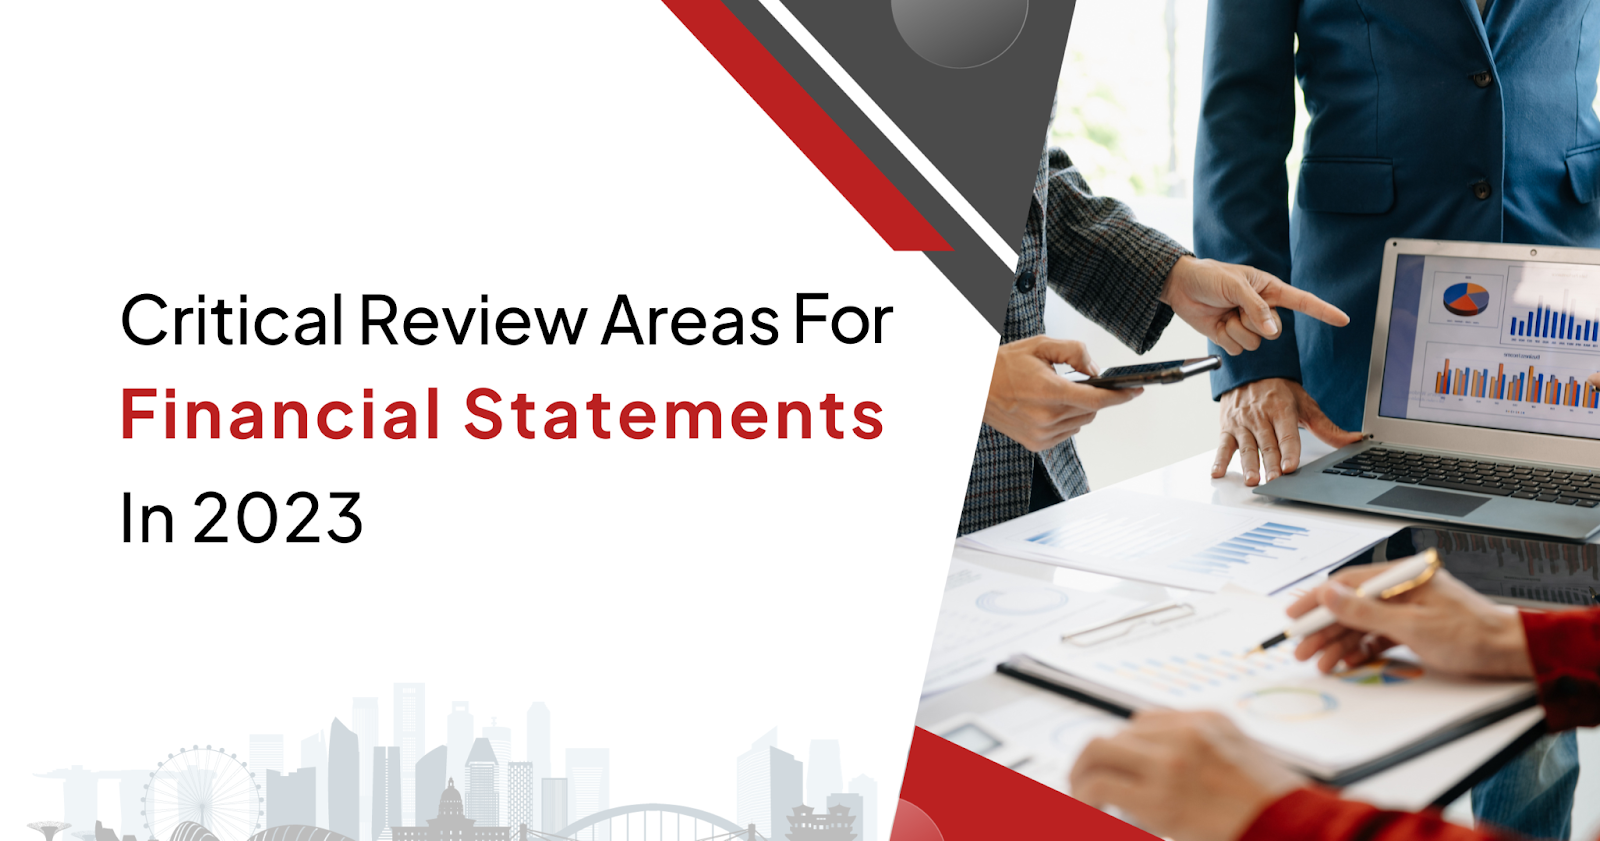 Critical Review Areas for Financial Statements in 2023